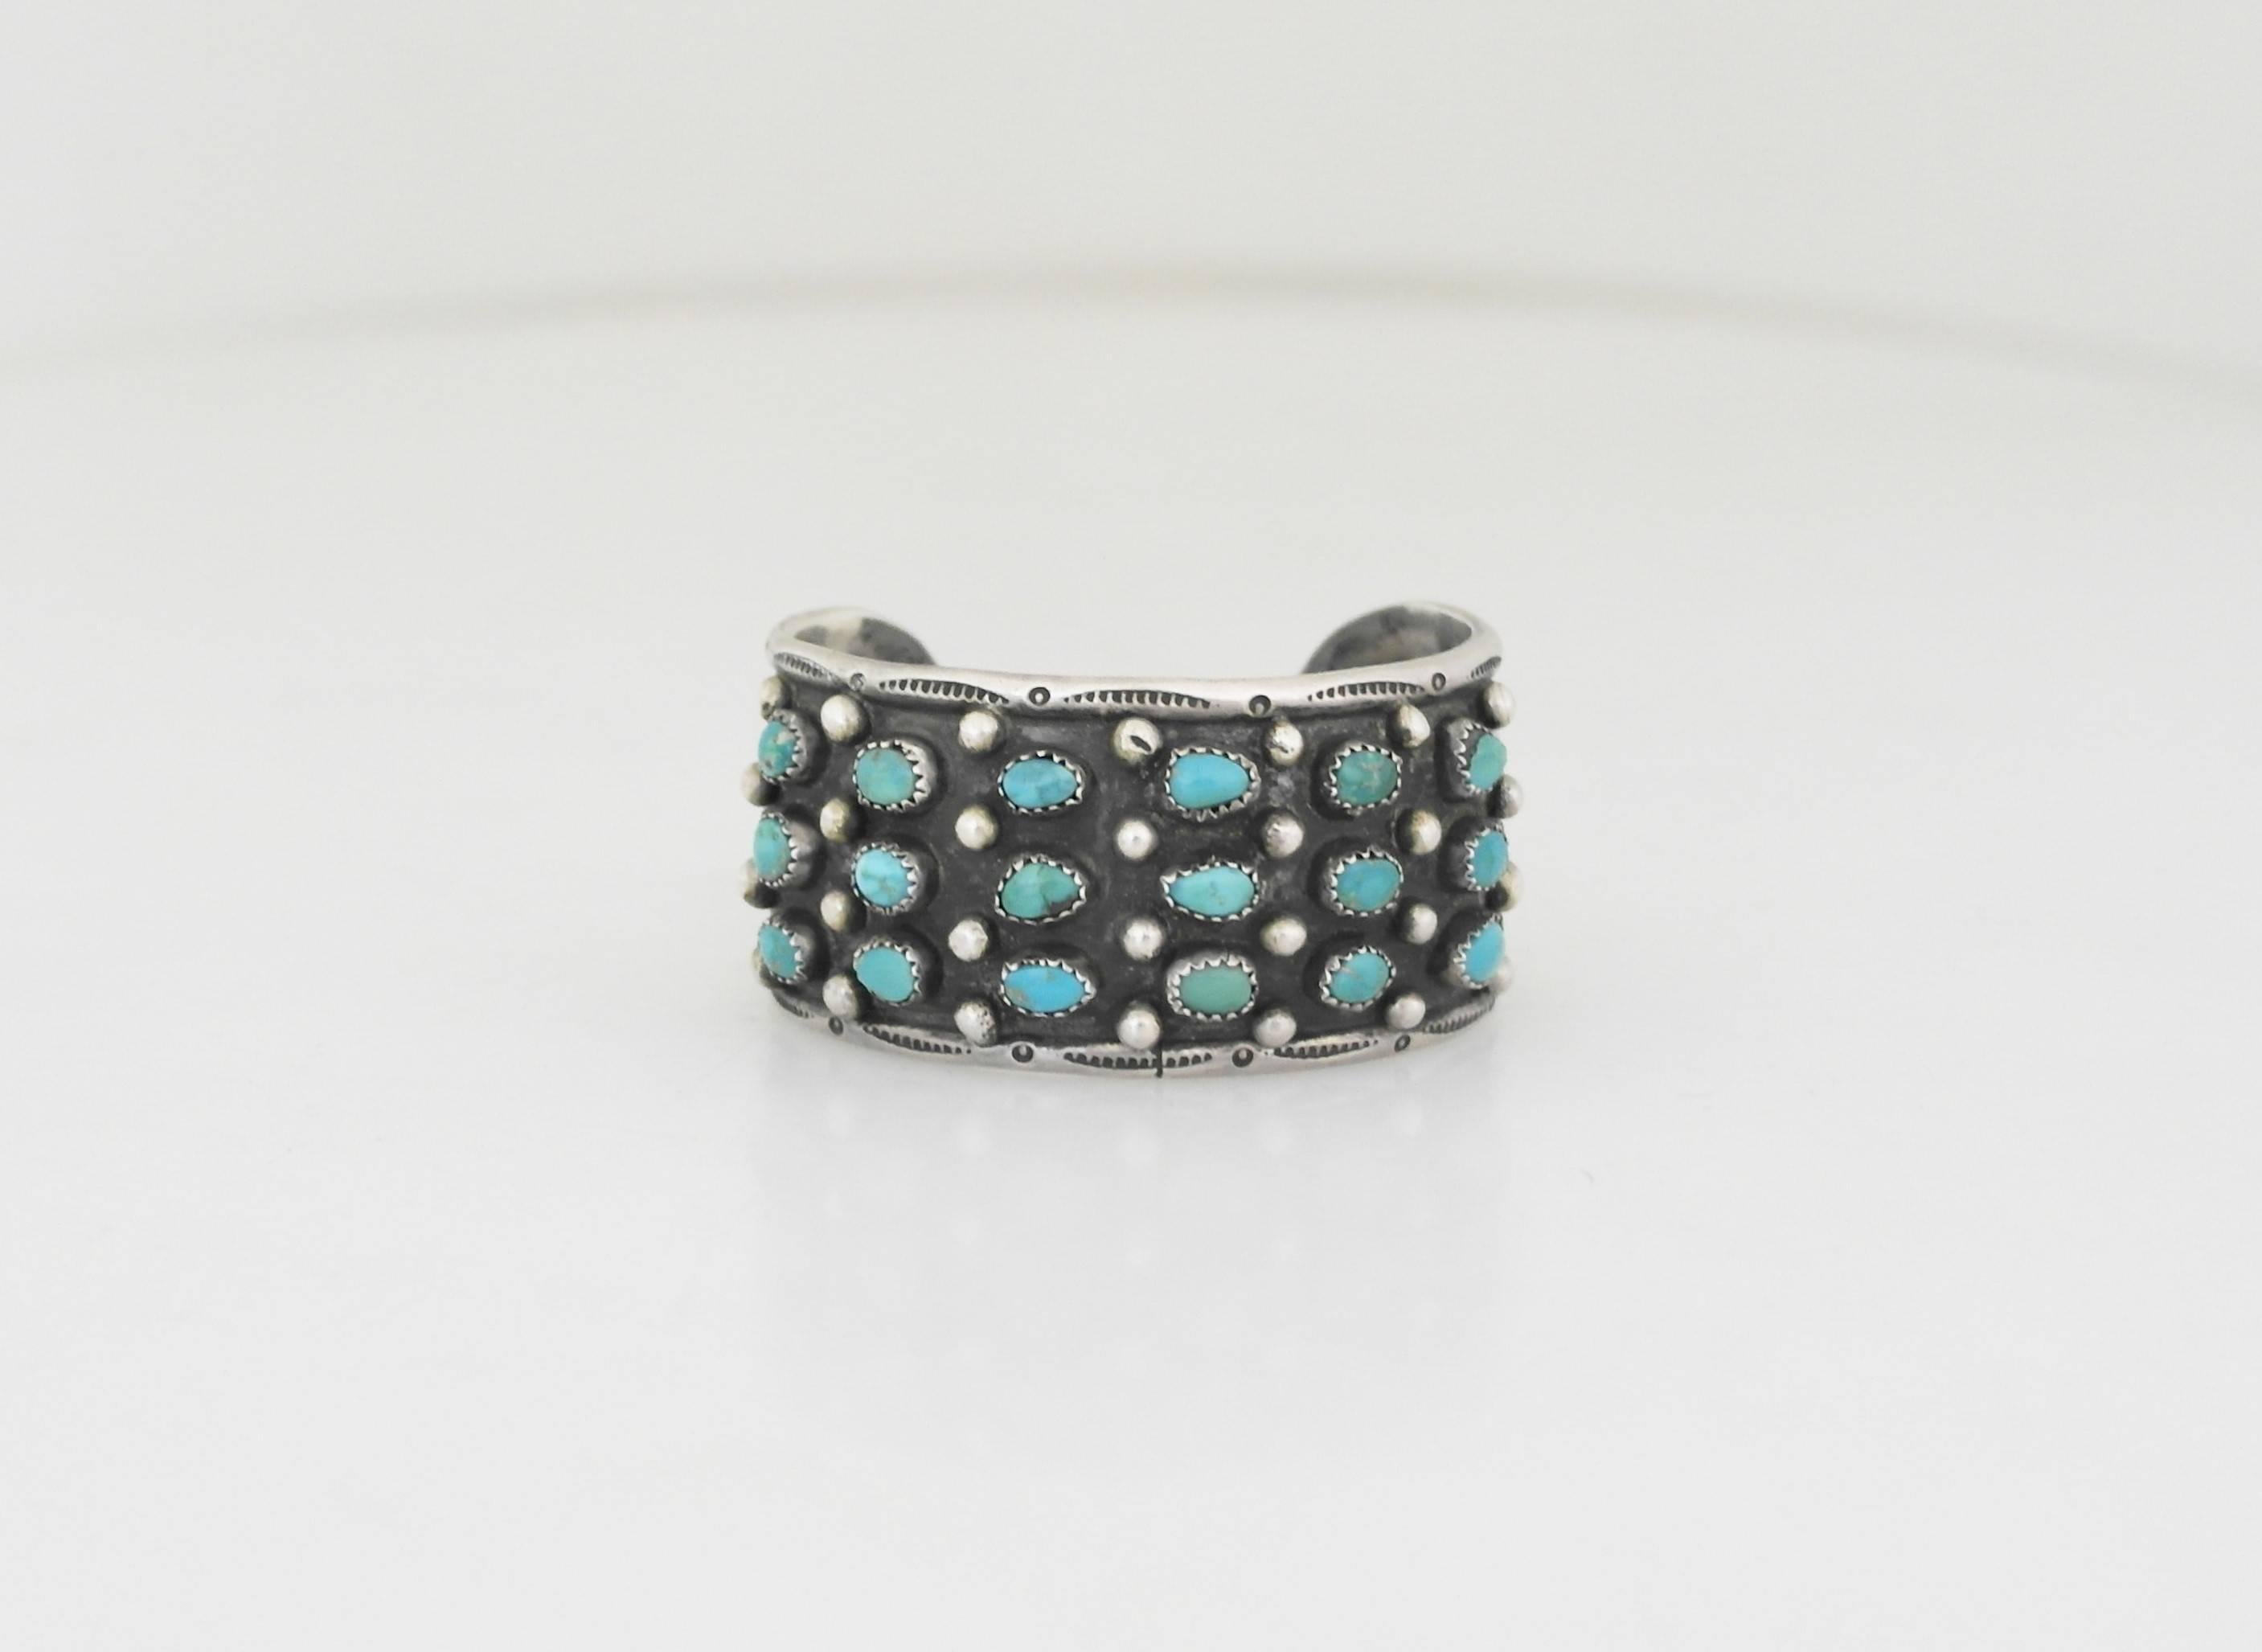 Being offered is a sterling silver cuff bracelet by Native American silversmith, Roger Skeets. Bracelet decorated with rows of bezel set turquoise stones & applied dots. Dimensions: 1 1/4 inches wide x 6 inches (wearable). Marked as illustrated. In